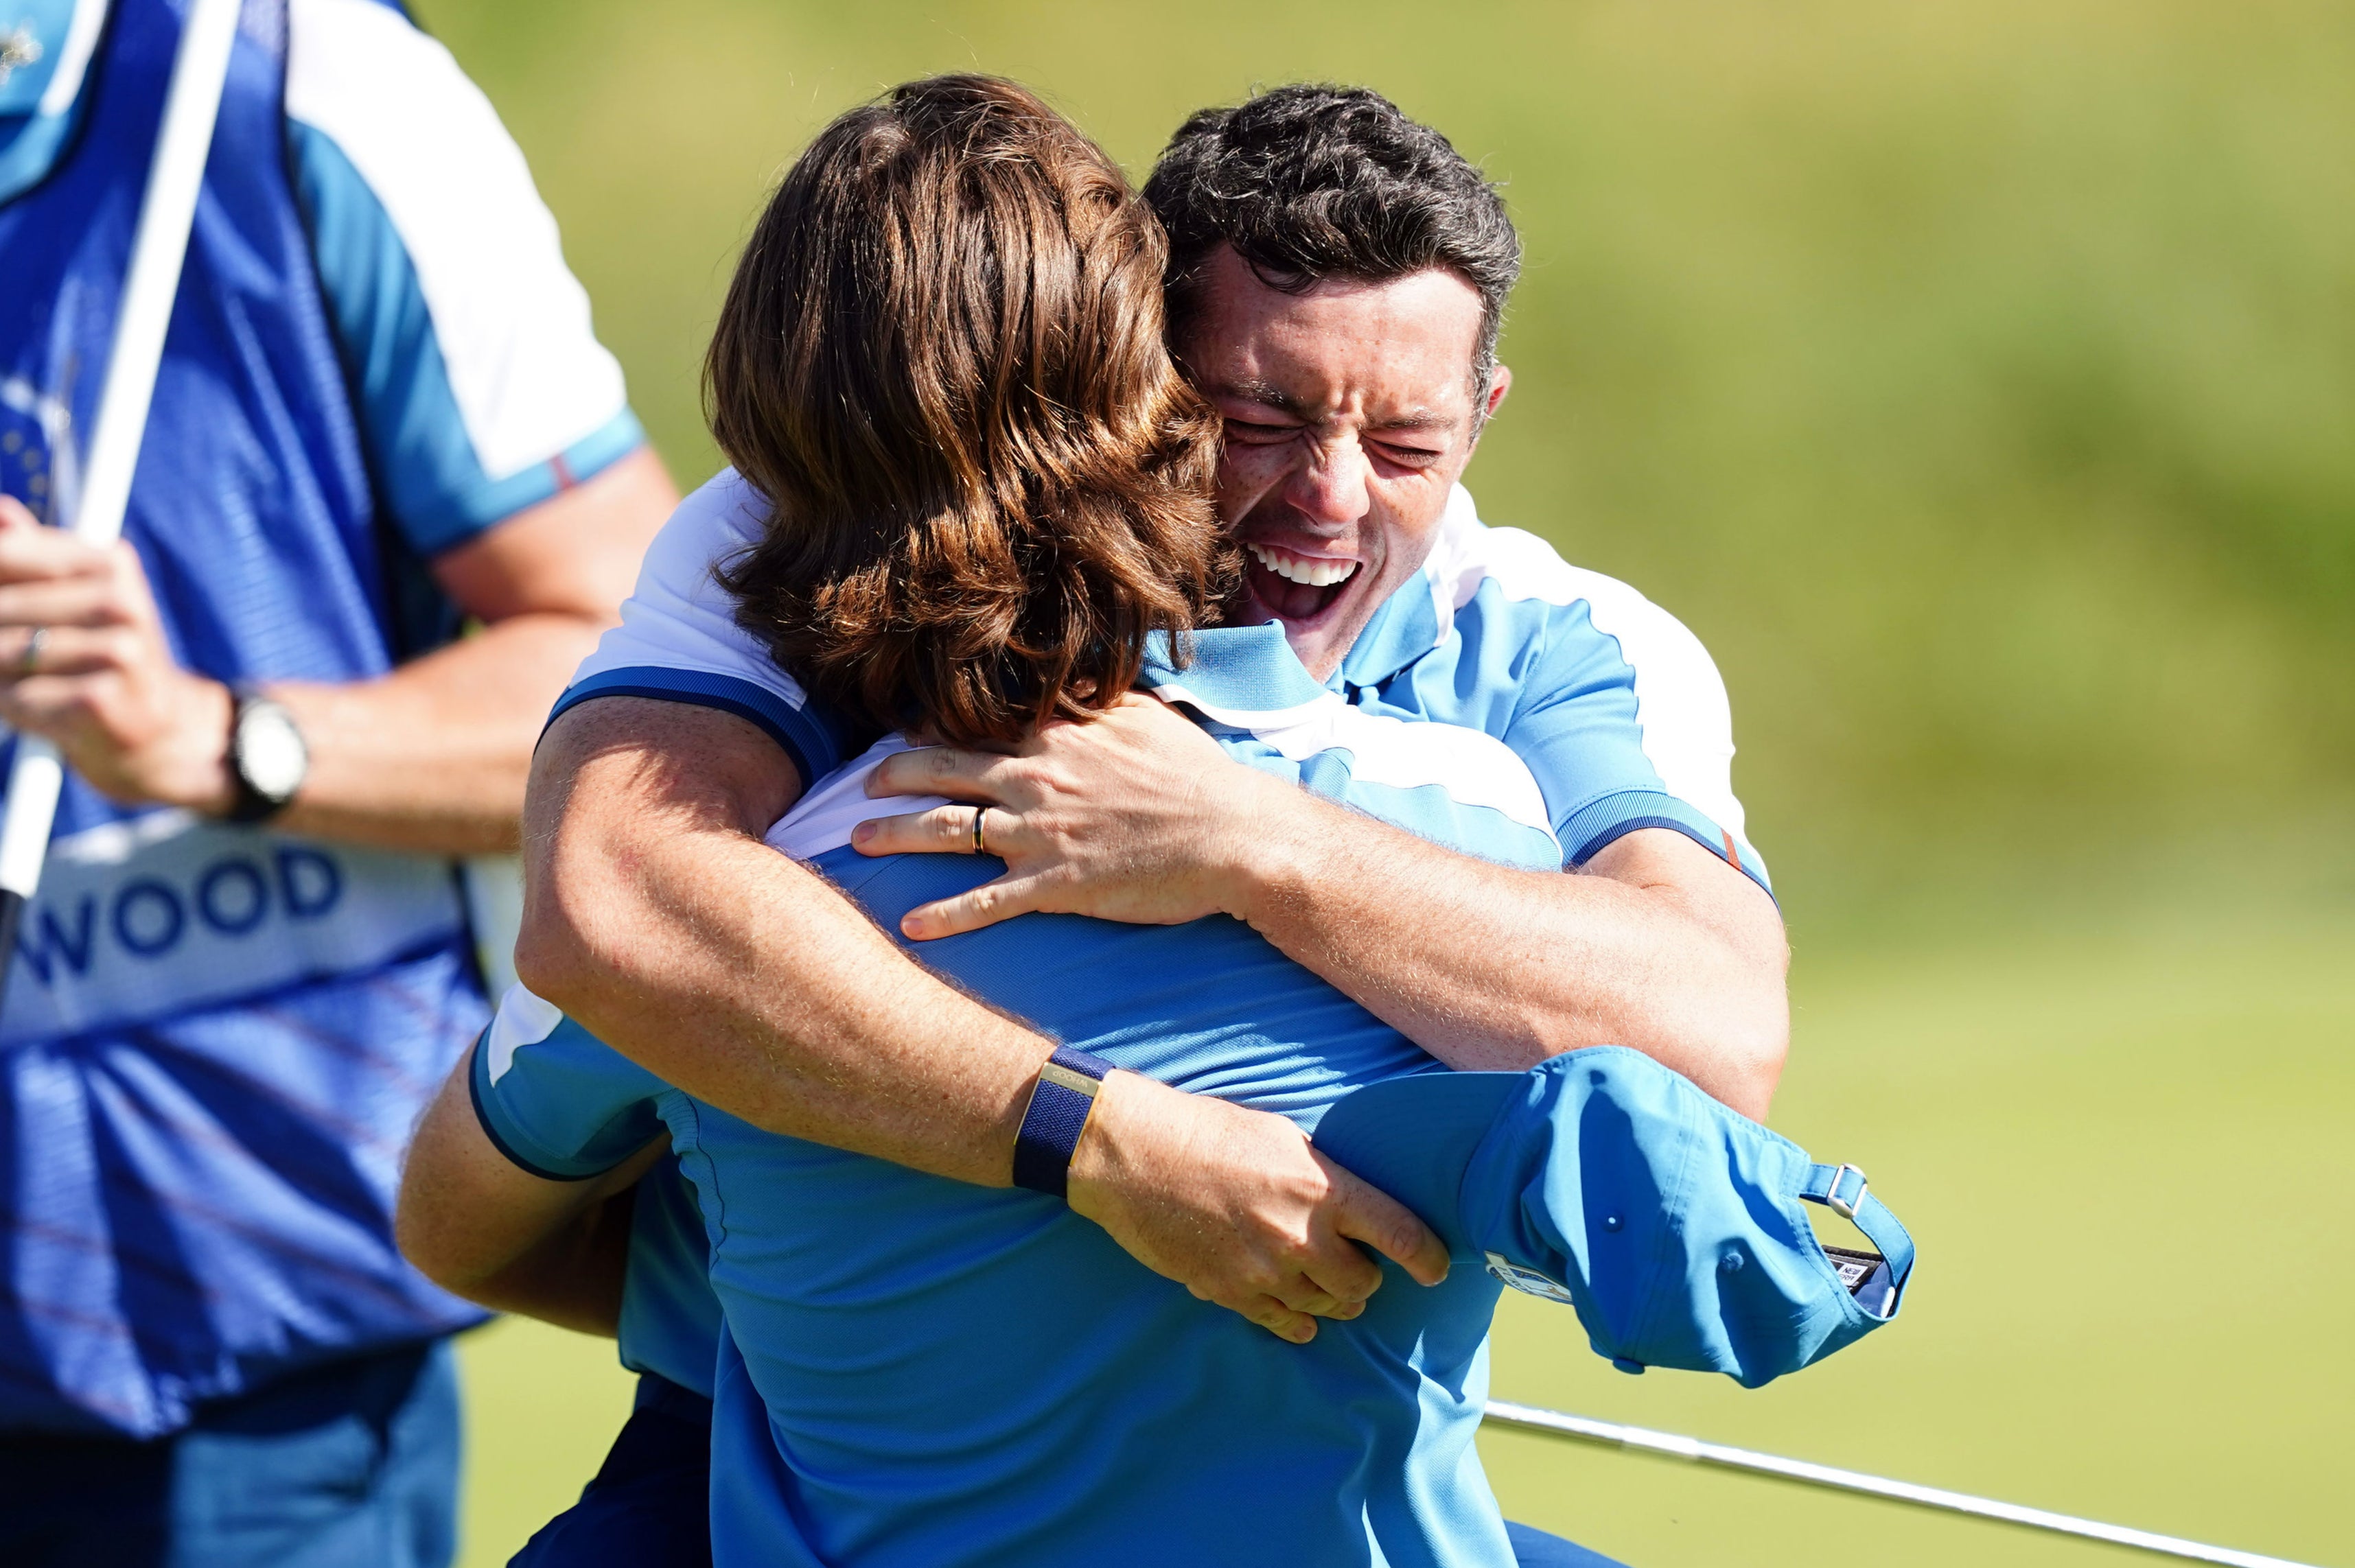 Fleetwood and McIlroy finished the morning in style